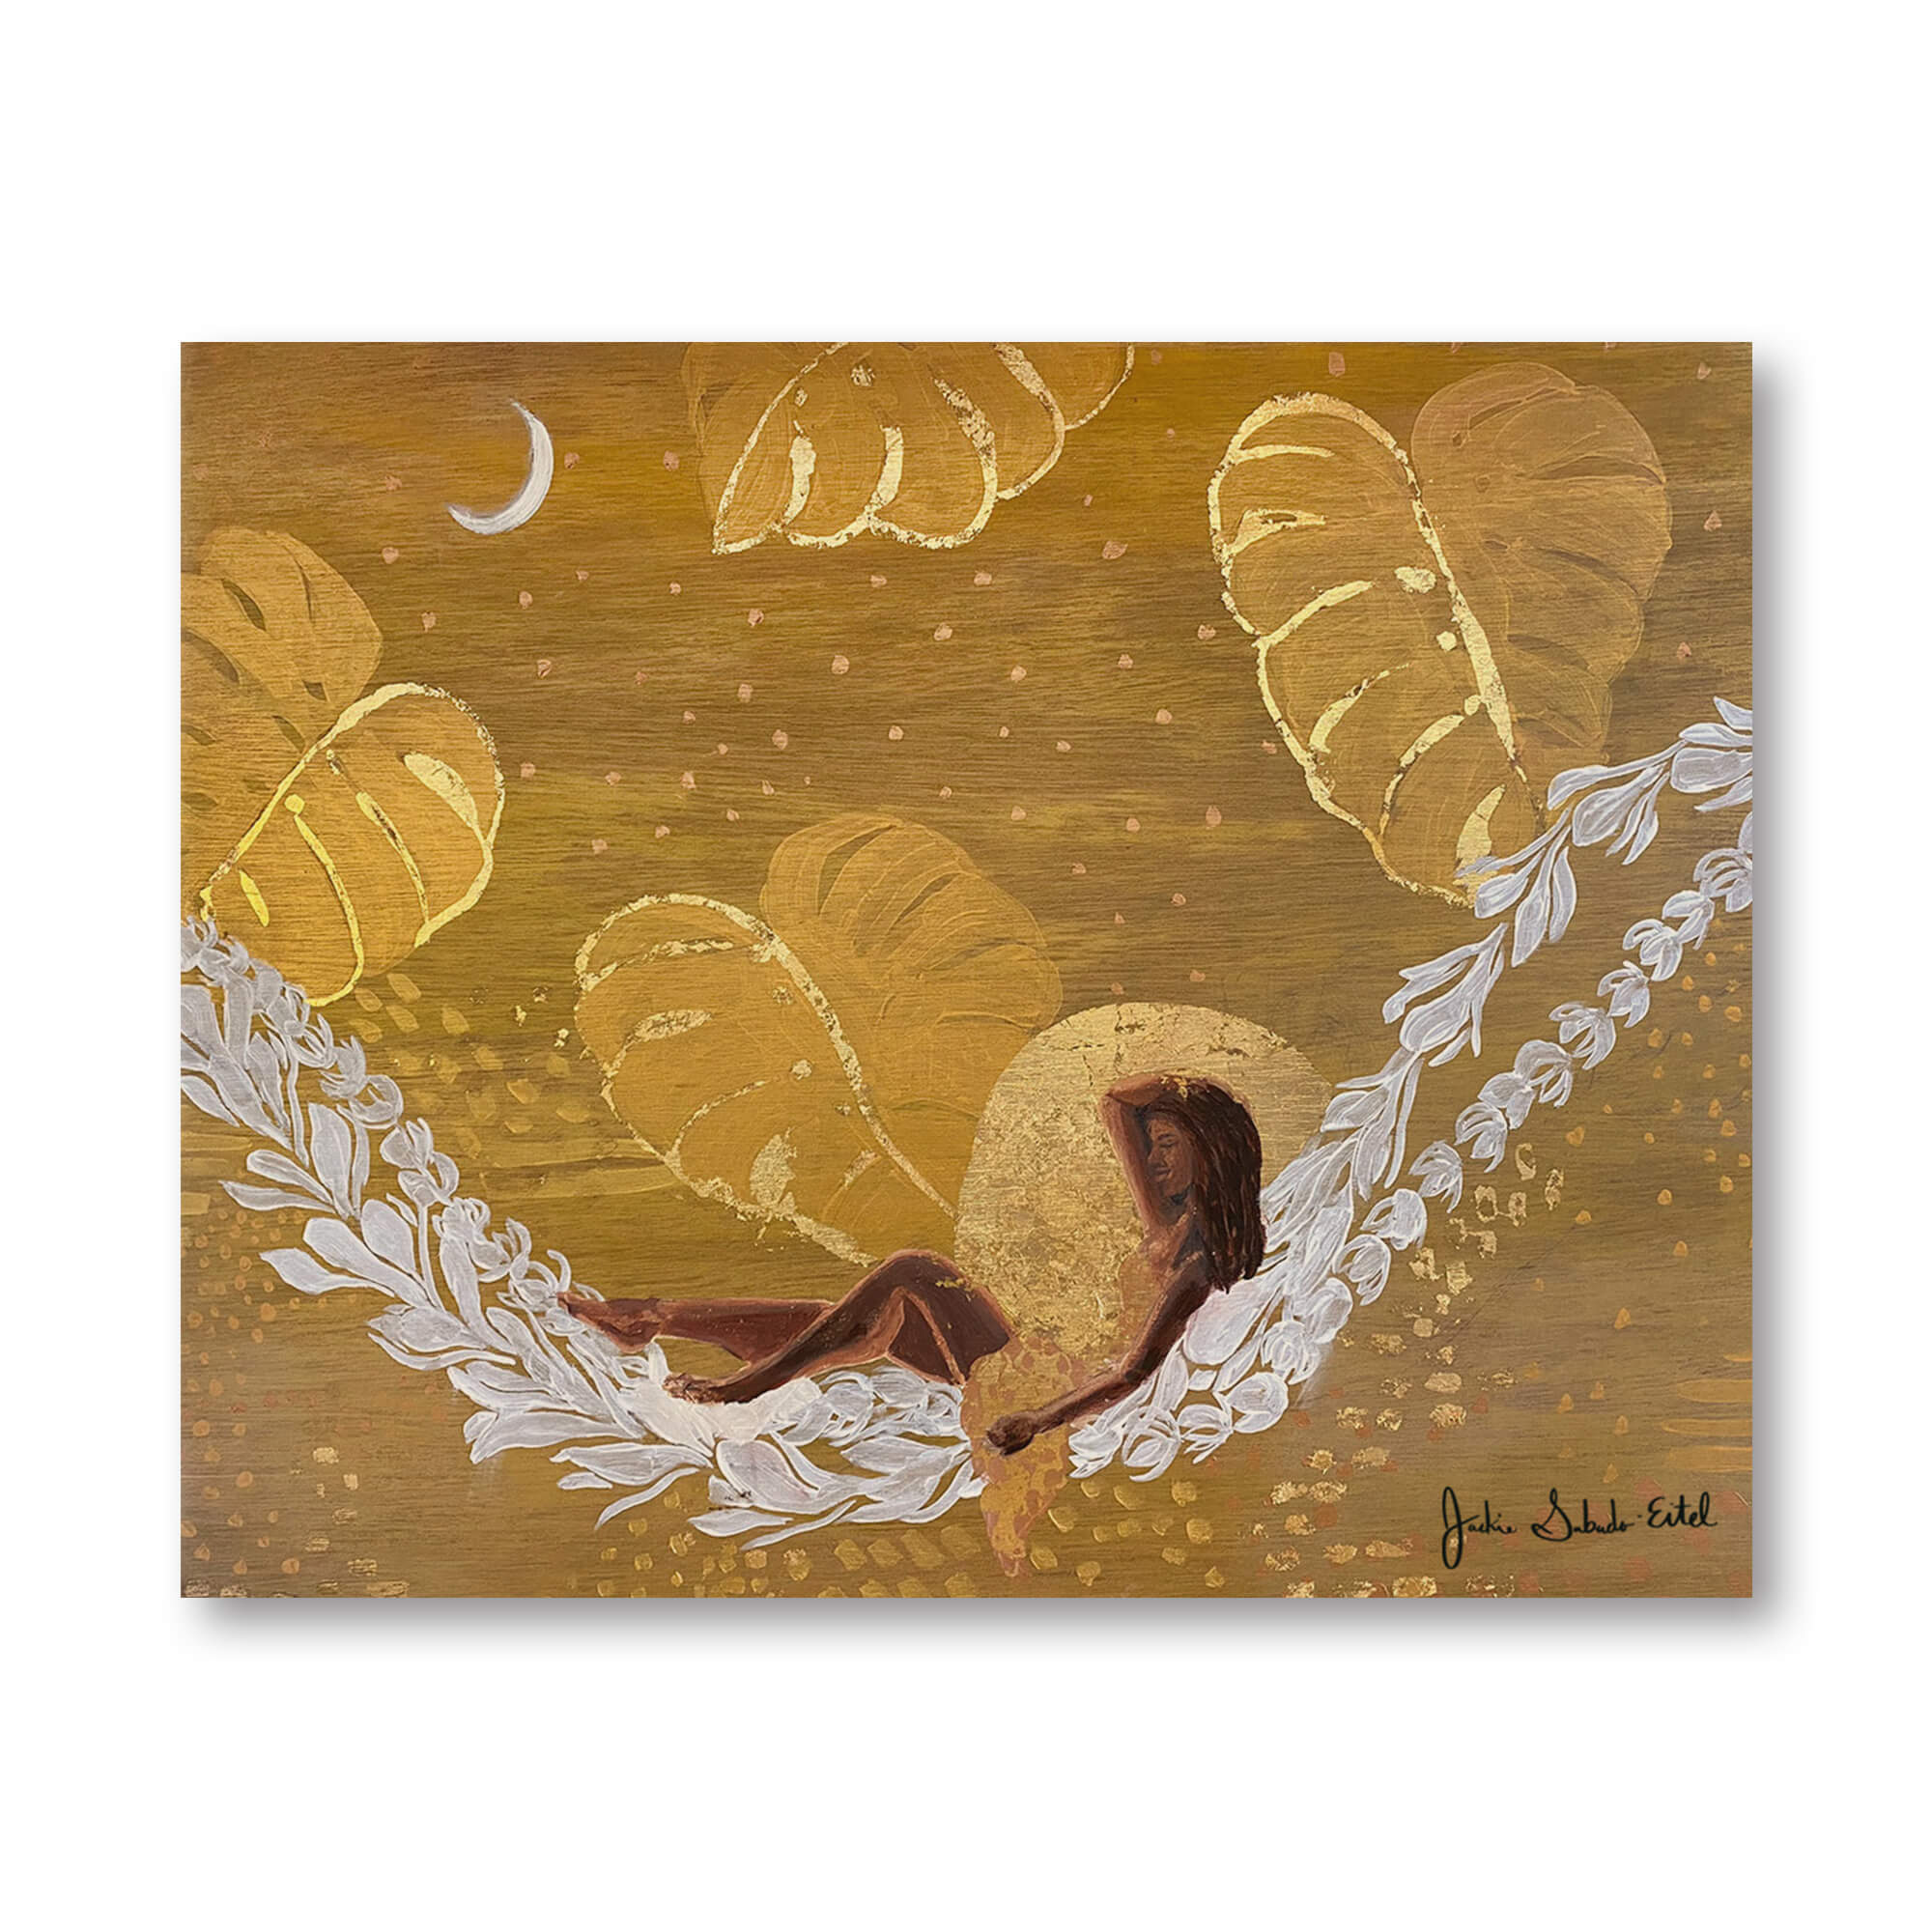 A wood print of a woman relaxing on a lei hammock with monstera leaves backdrop and some gold touchups by Hawaii artist Jackie Eitel